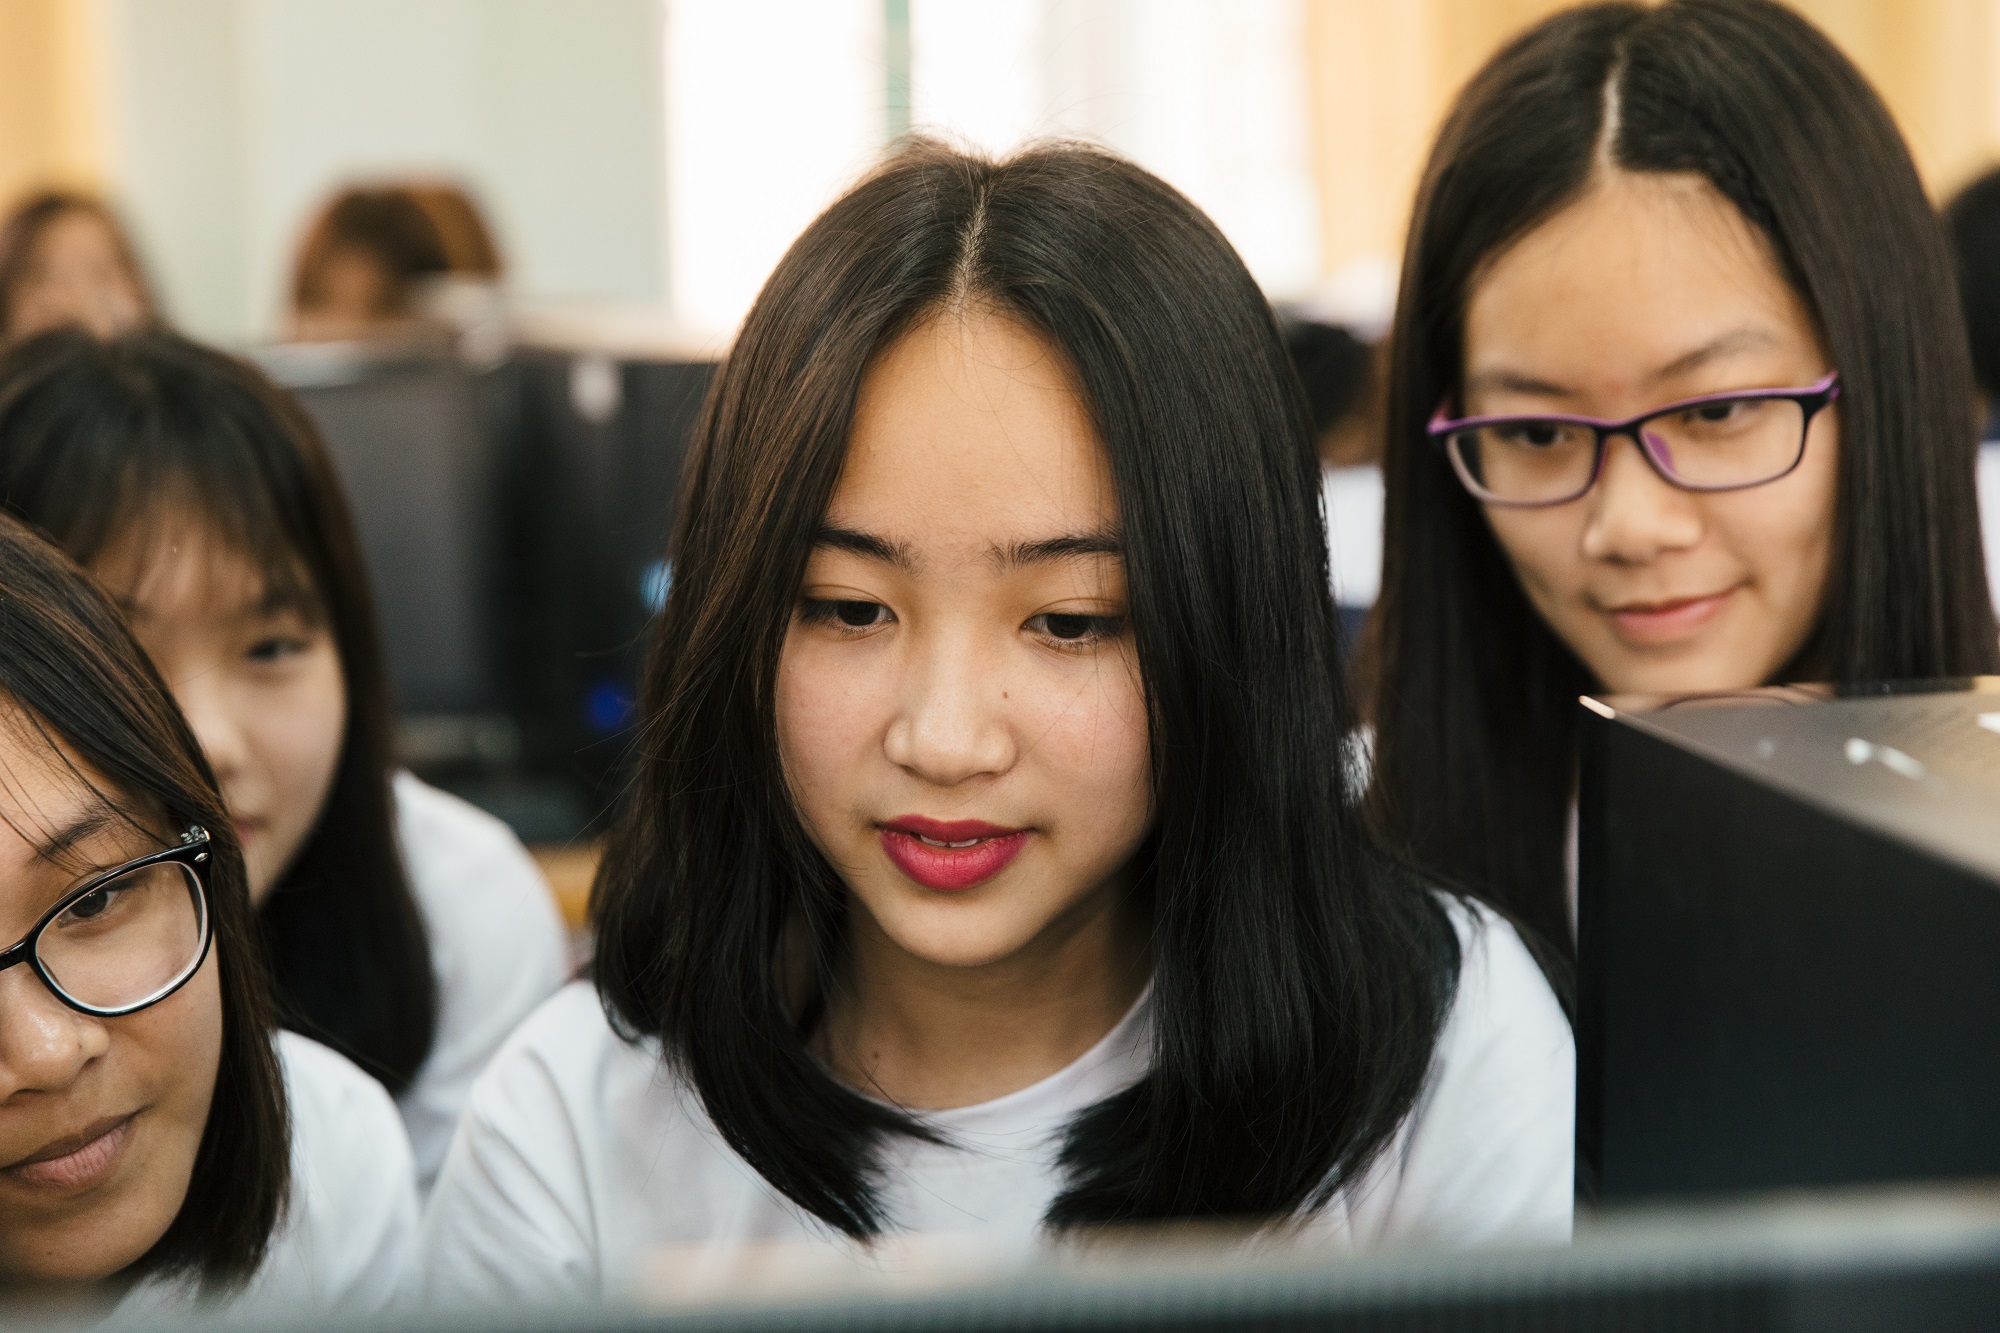 Female students crowd around a computer screen, smiling